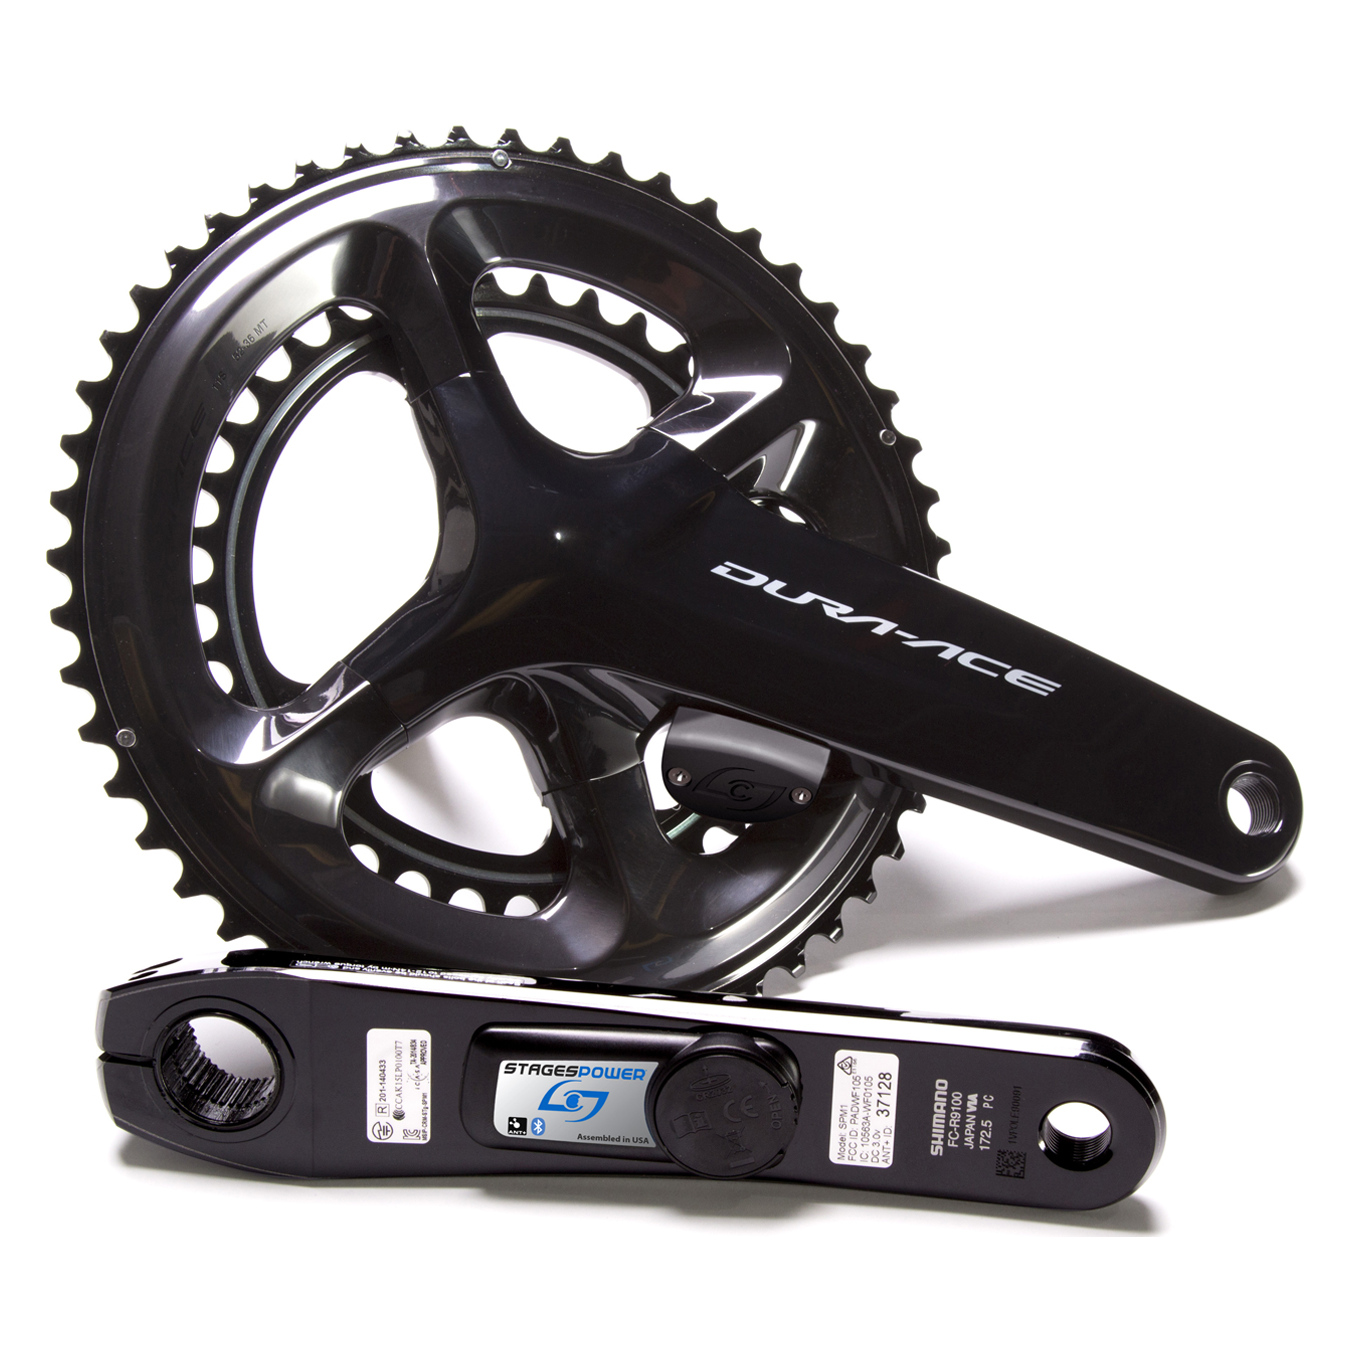 Picture of Stages Cycling Power LR Powermeter | Crankset by Shimano - Dura Ace R9100 | 2x11-speed